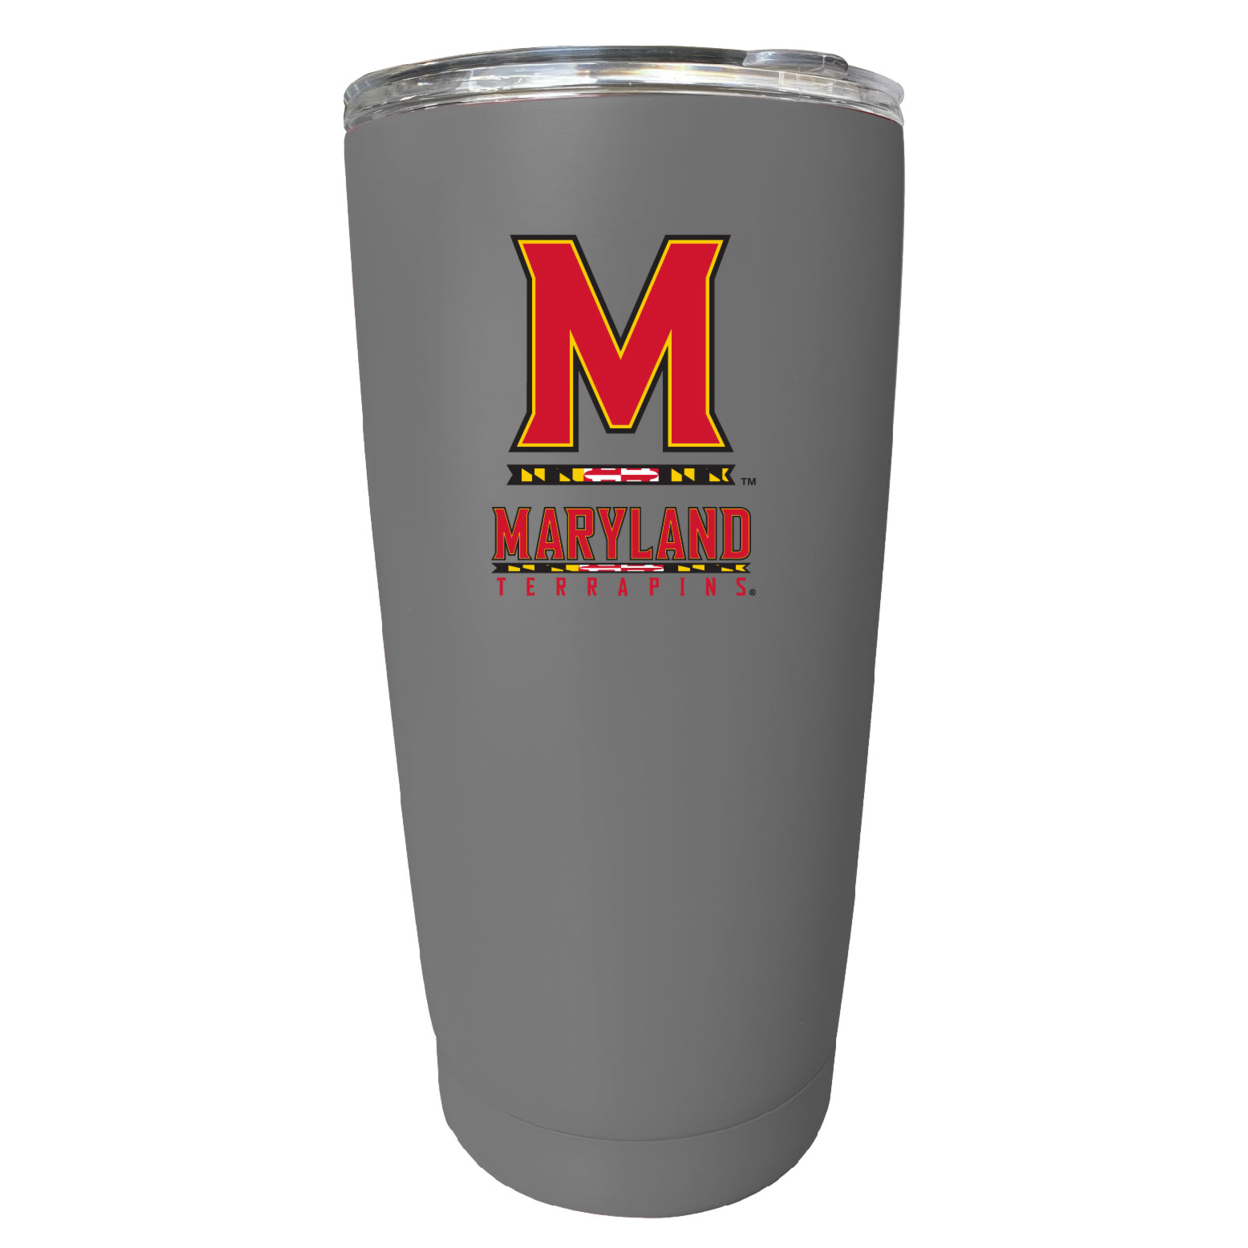 Maryland Terrapins 16 Oz Stainless Steel Insulated Tumbler - Gray